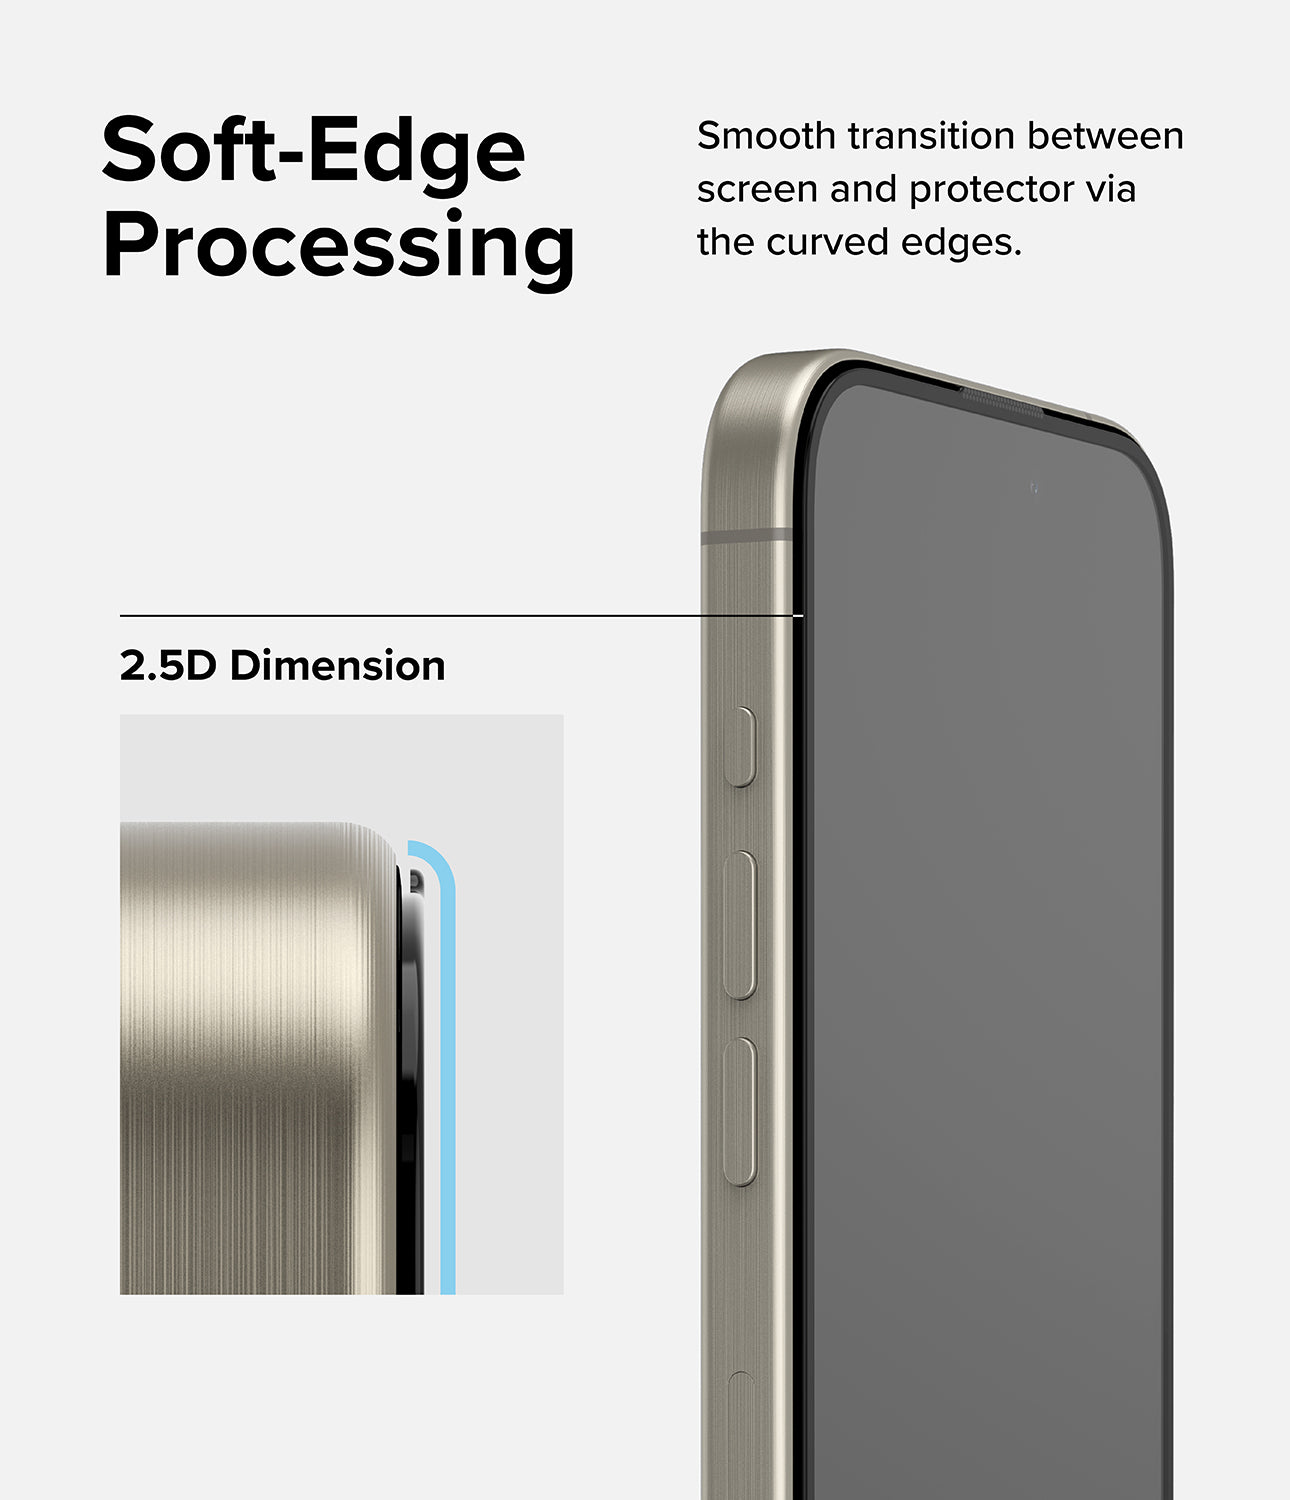 iPhone 15 Pro Max Screen Protector | Easy Slide Tempered Glass - Soft-Edge Processing. Smooth transition between screen and protector via the curved edges.